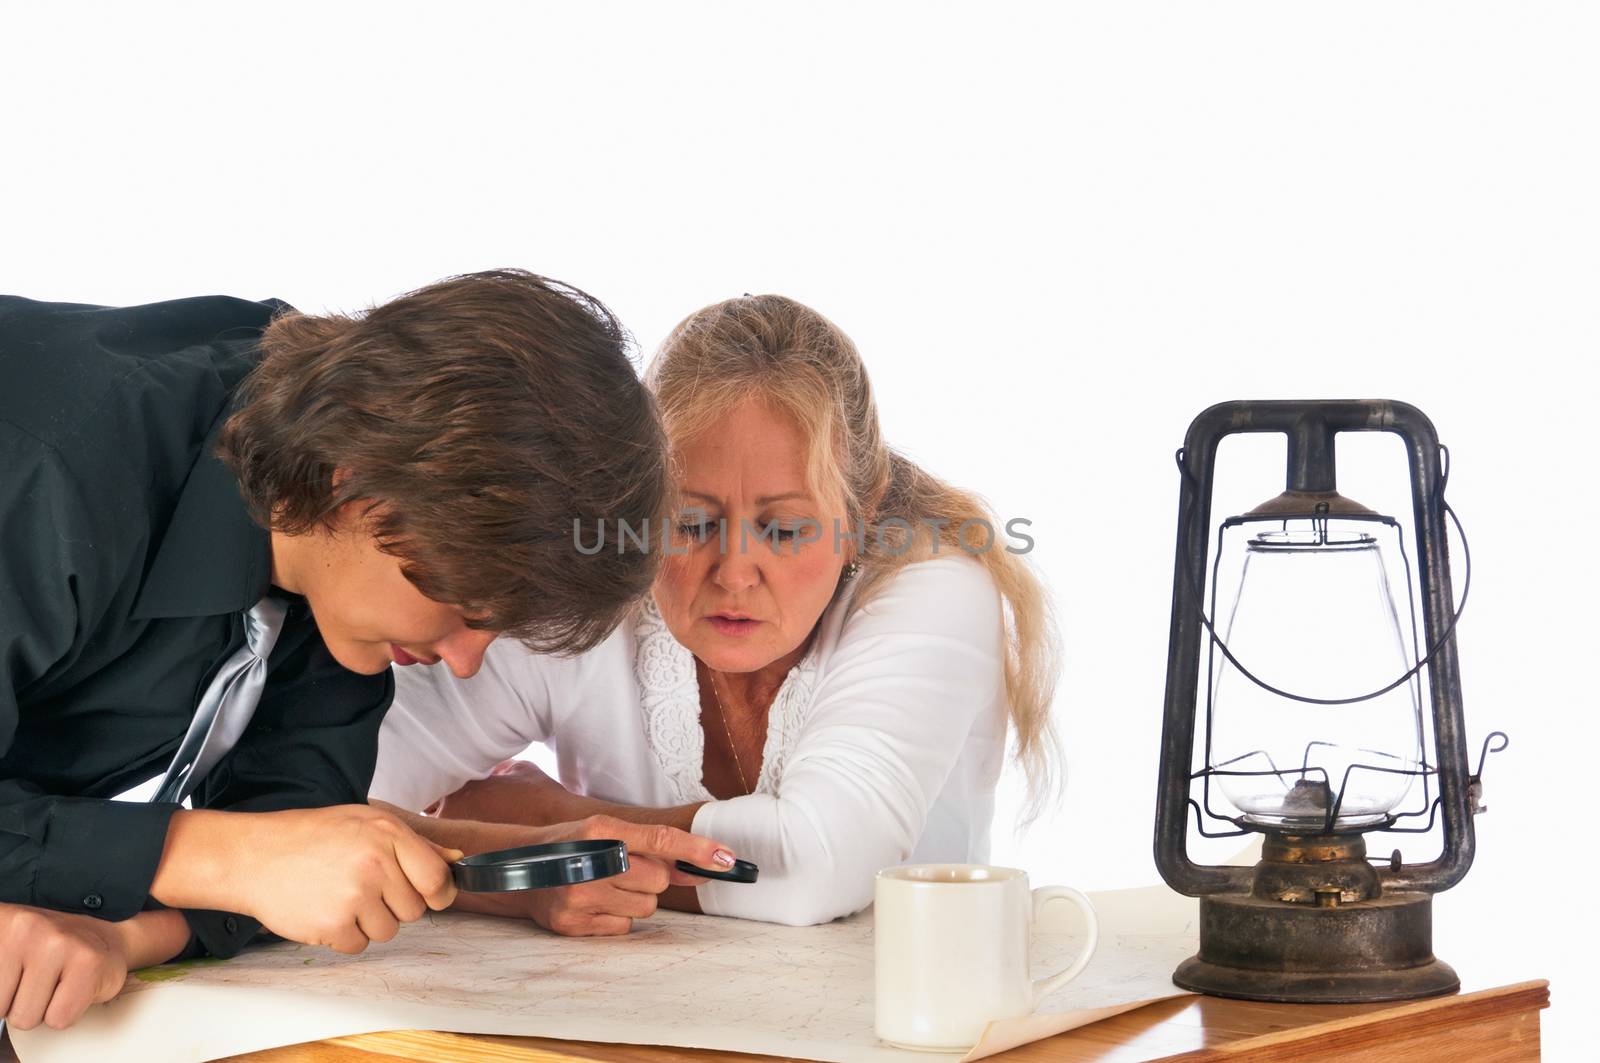 Two modern treasure hunters study a topo map to find clues to the location of valuable treasure. Isolated on a white background